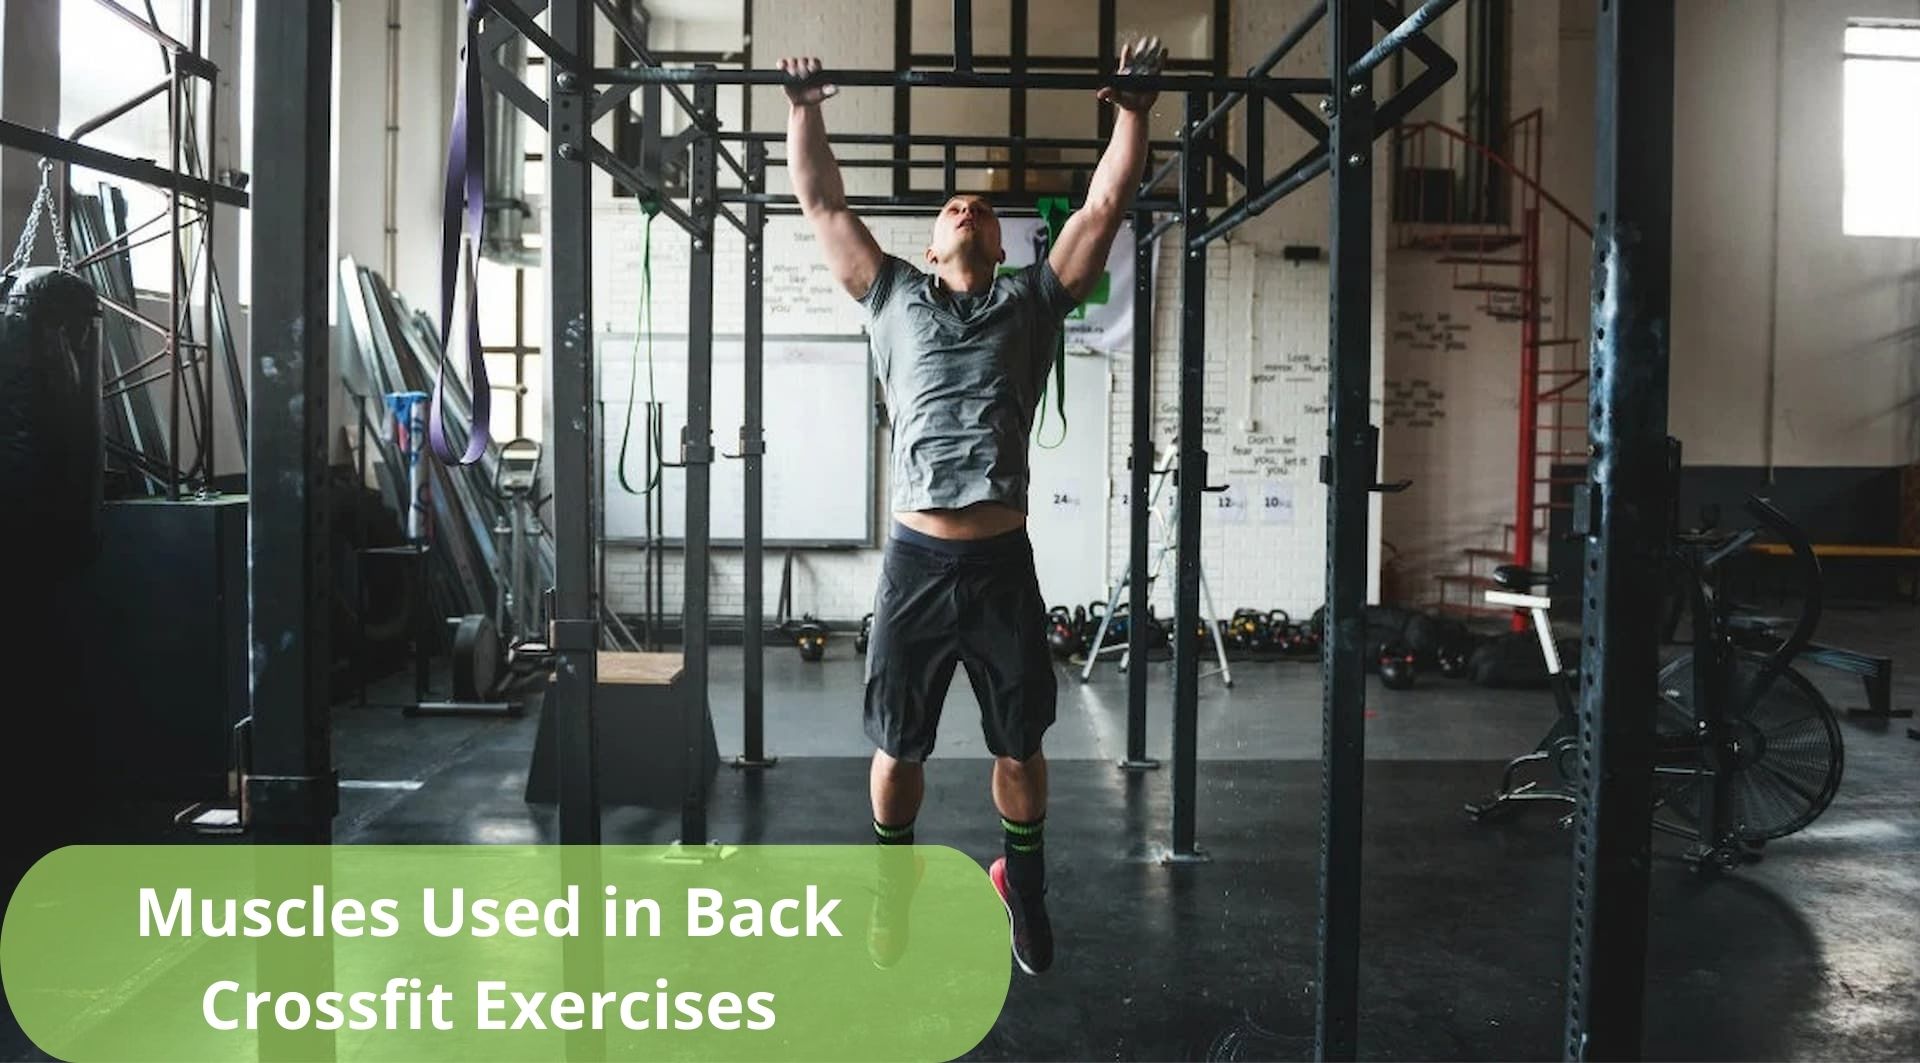 How Back Workouts Can Support CrossFit Performance